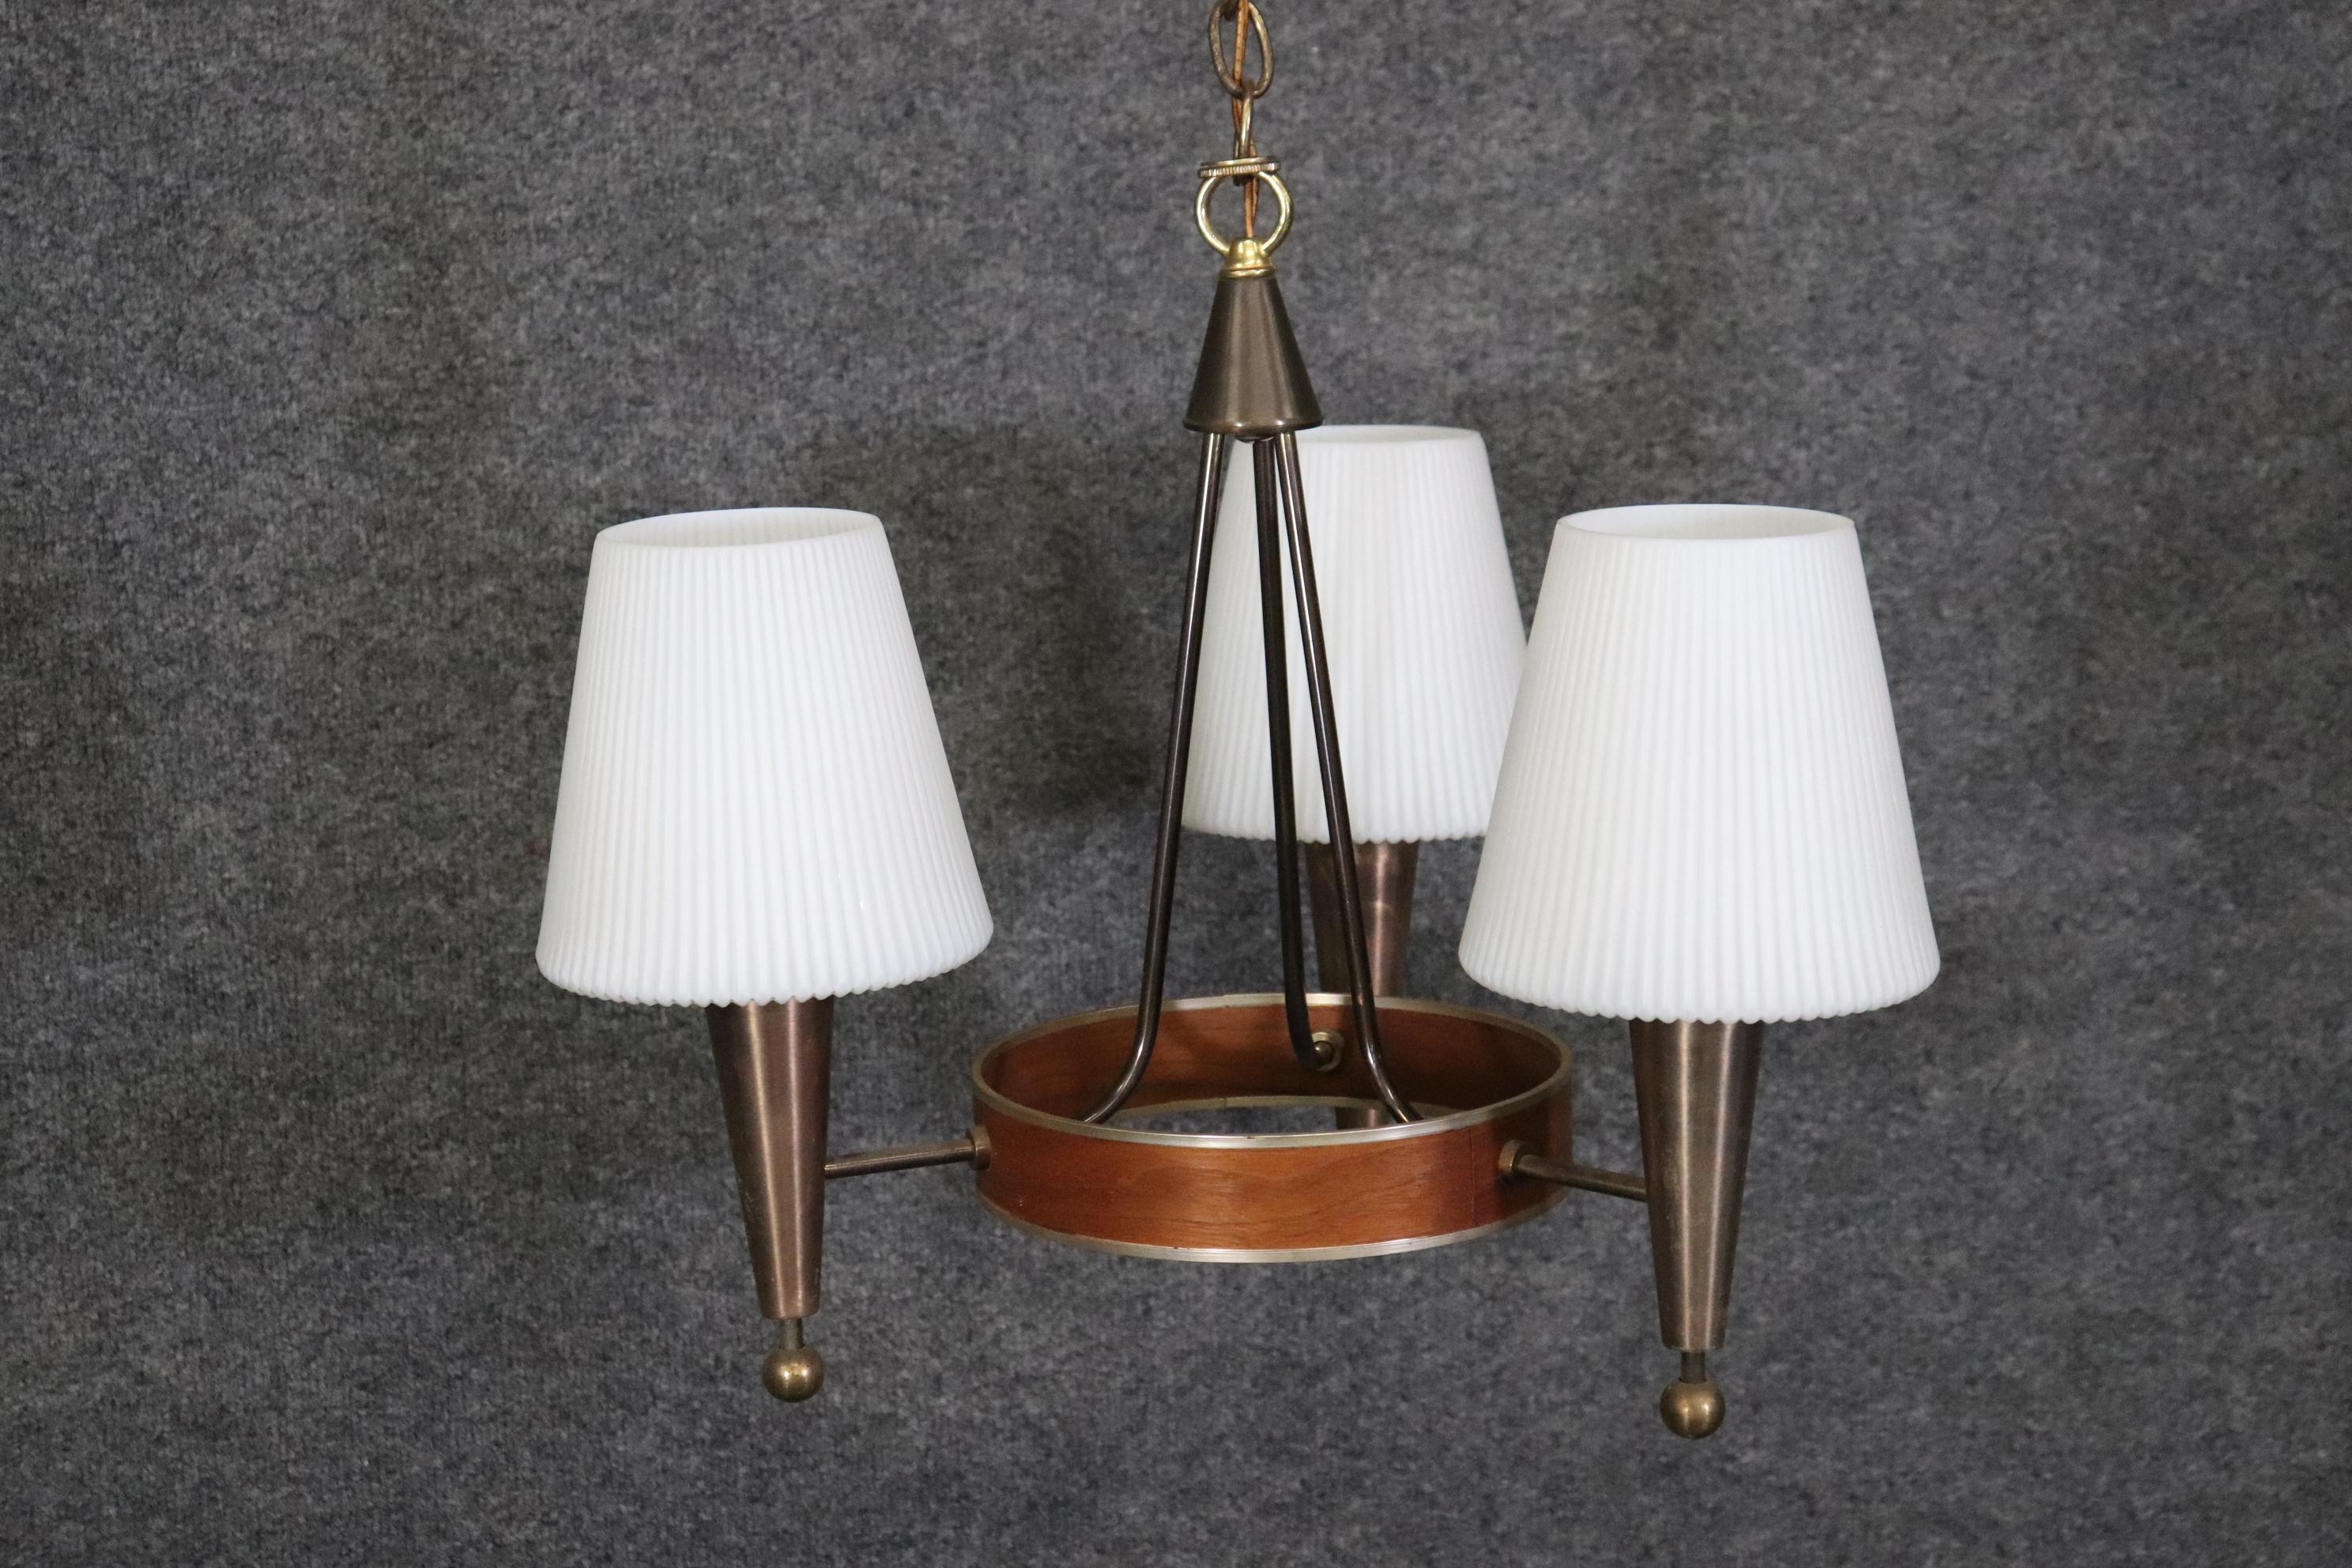 Dimensions- H: 18in W: 19 1/2in D: 19 1/2in

This Mid Century Modern three light chandelier is something to be seen!  Lightolier produced this walnut and brass chandelier. Lightolier was founded in 1904 by Bernhard Blitzer. Its original name was the